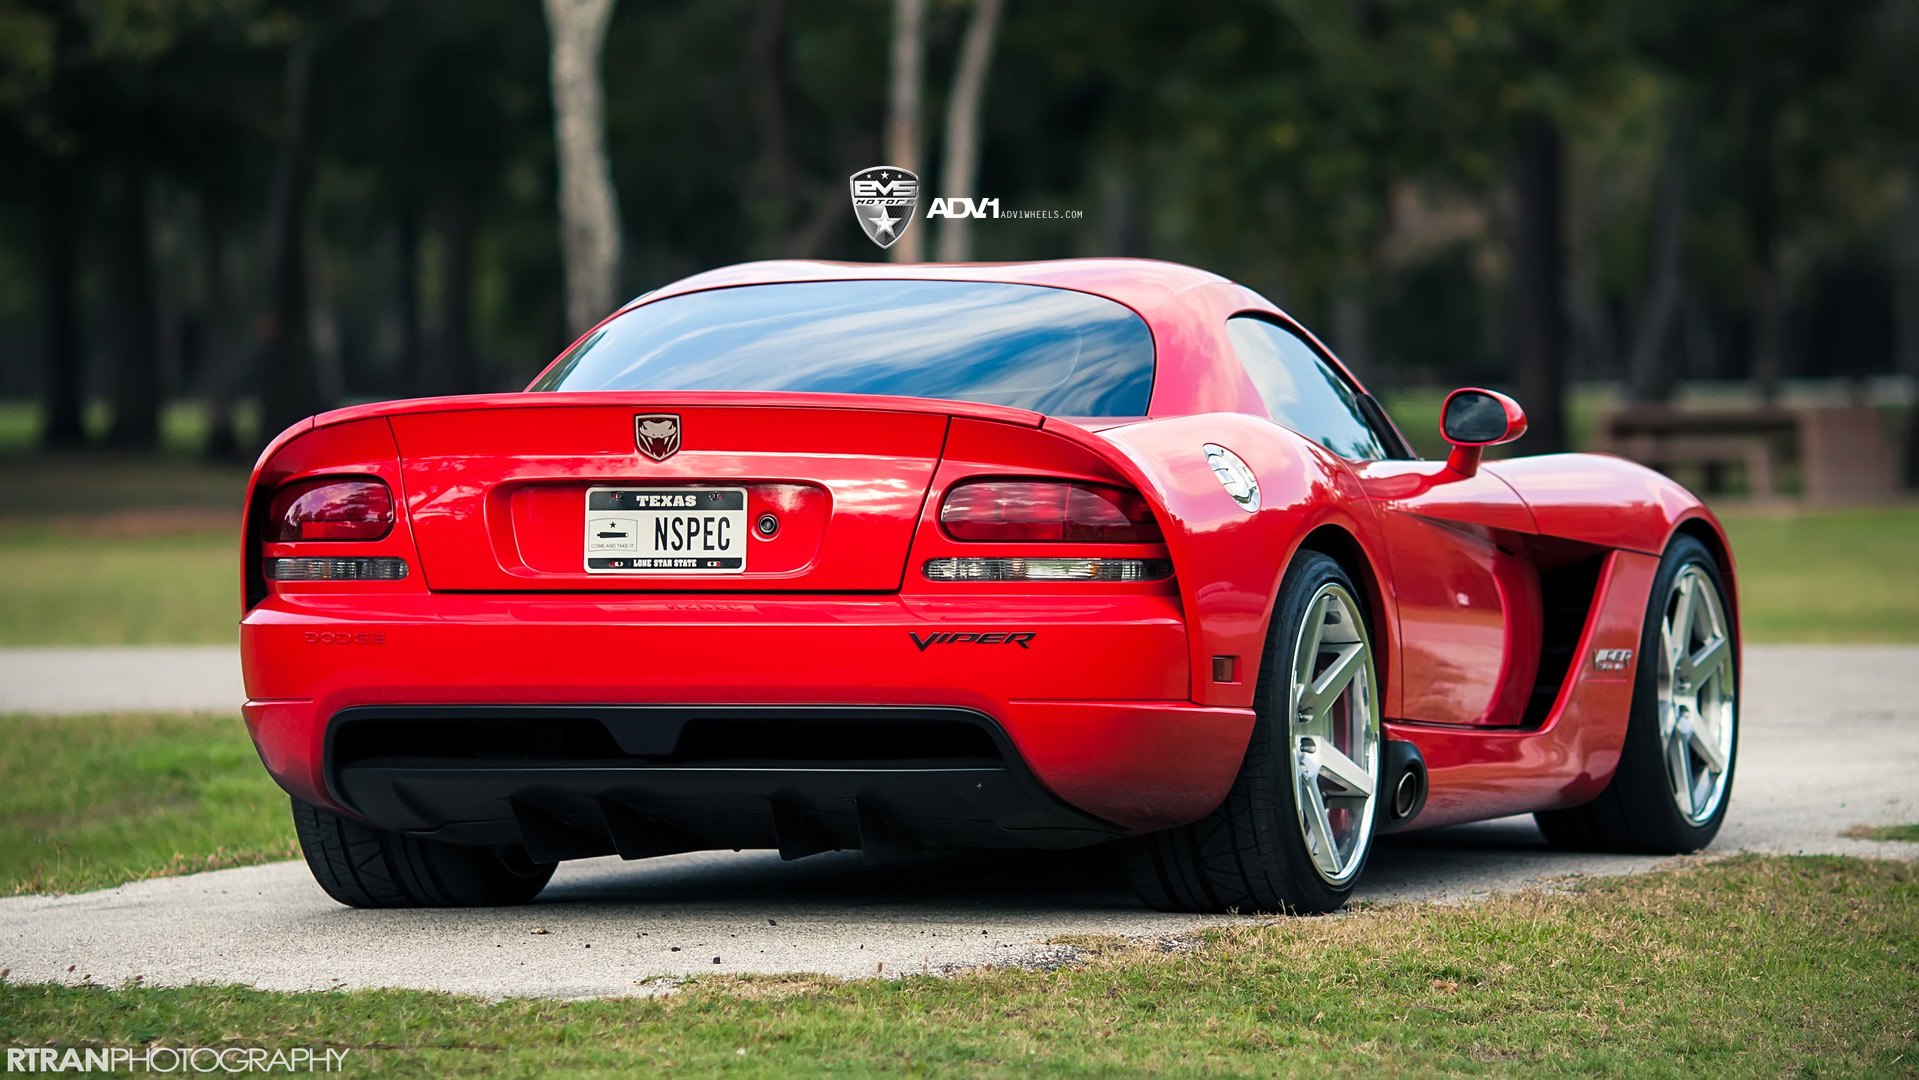 Red Dodge Viper with Aftermarket Rear Bumper - Photo by ADV.1